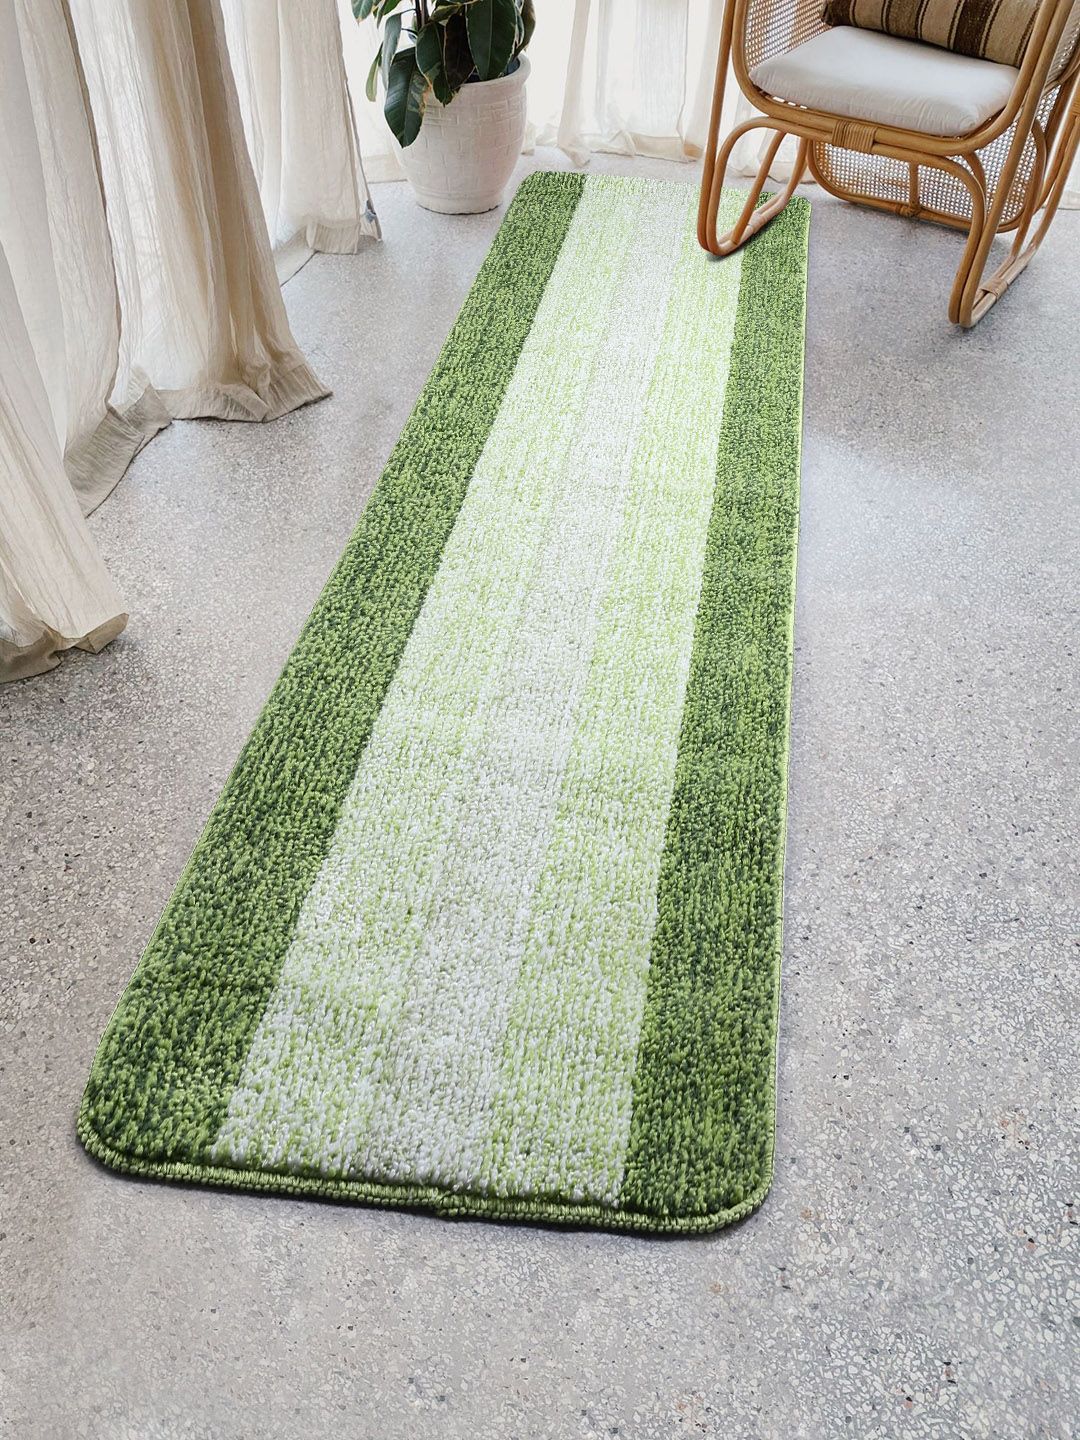 Saral Home Green Striped Microfibre Runner Price in India